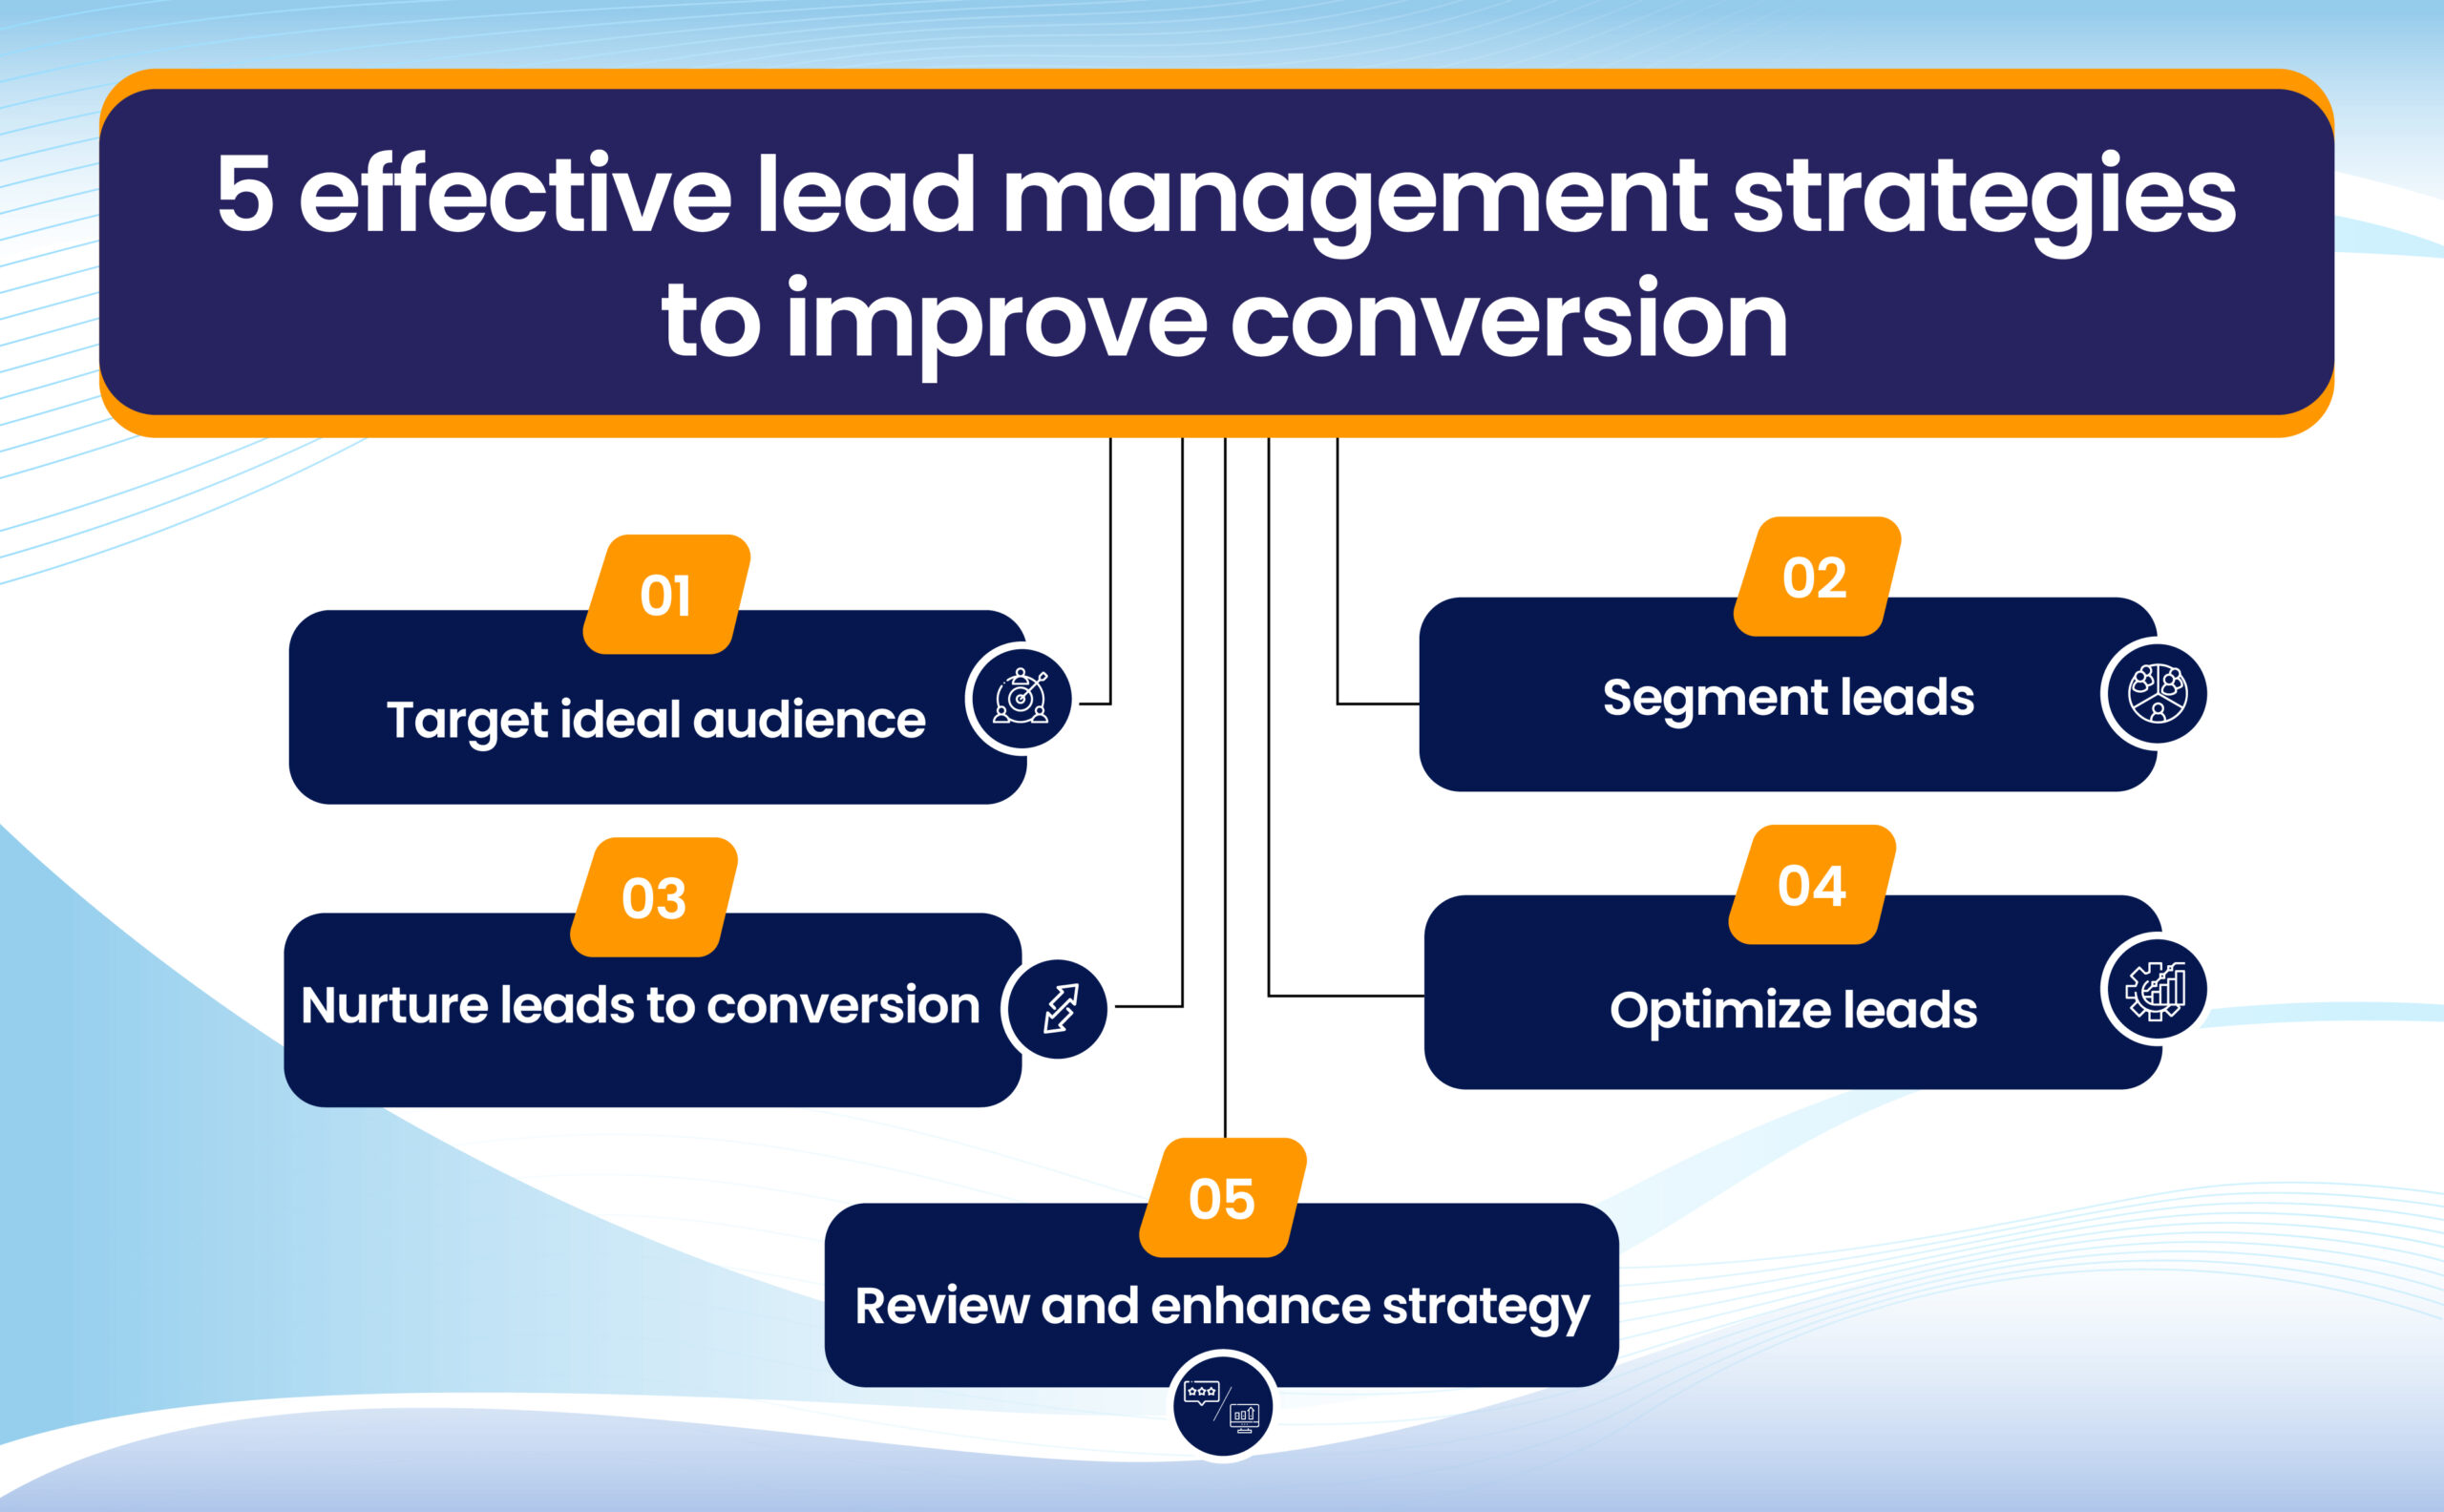 Lead management Strategies to improve conversion